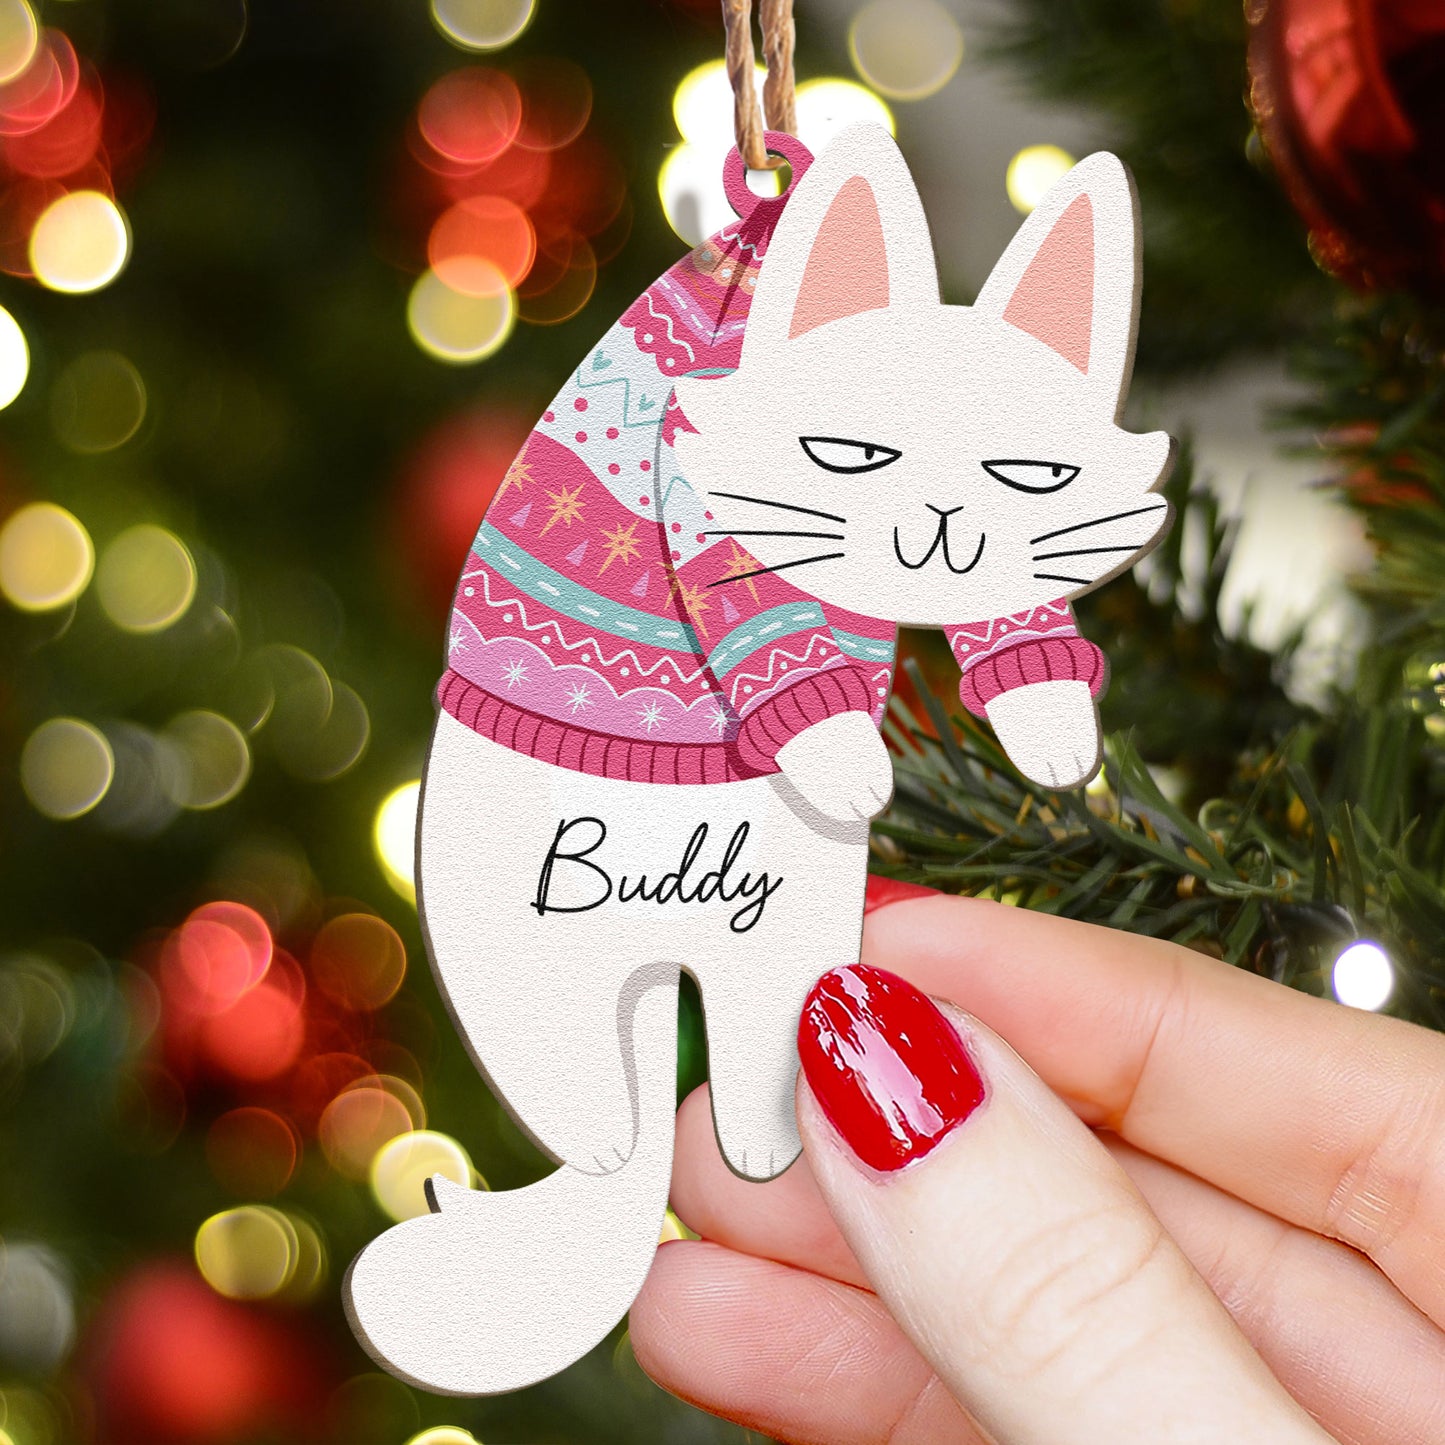 Hanging Cats - Personalized Wooden Ornament